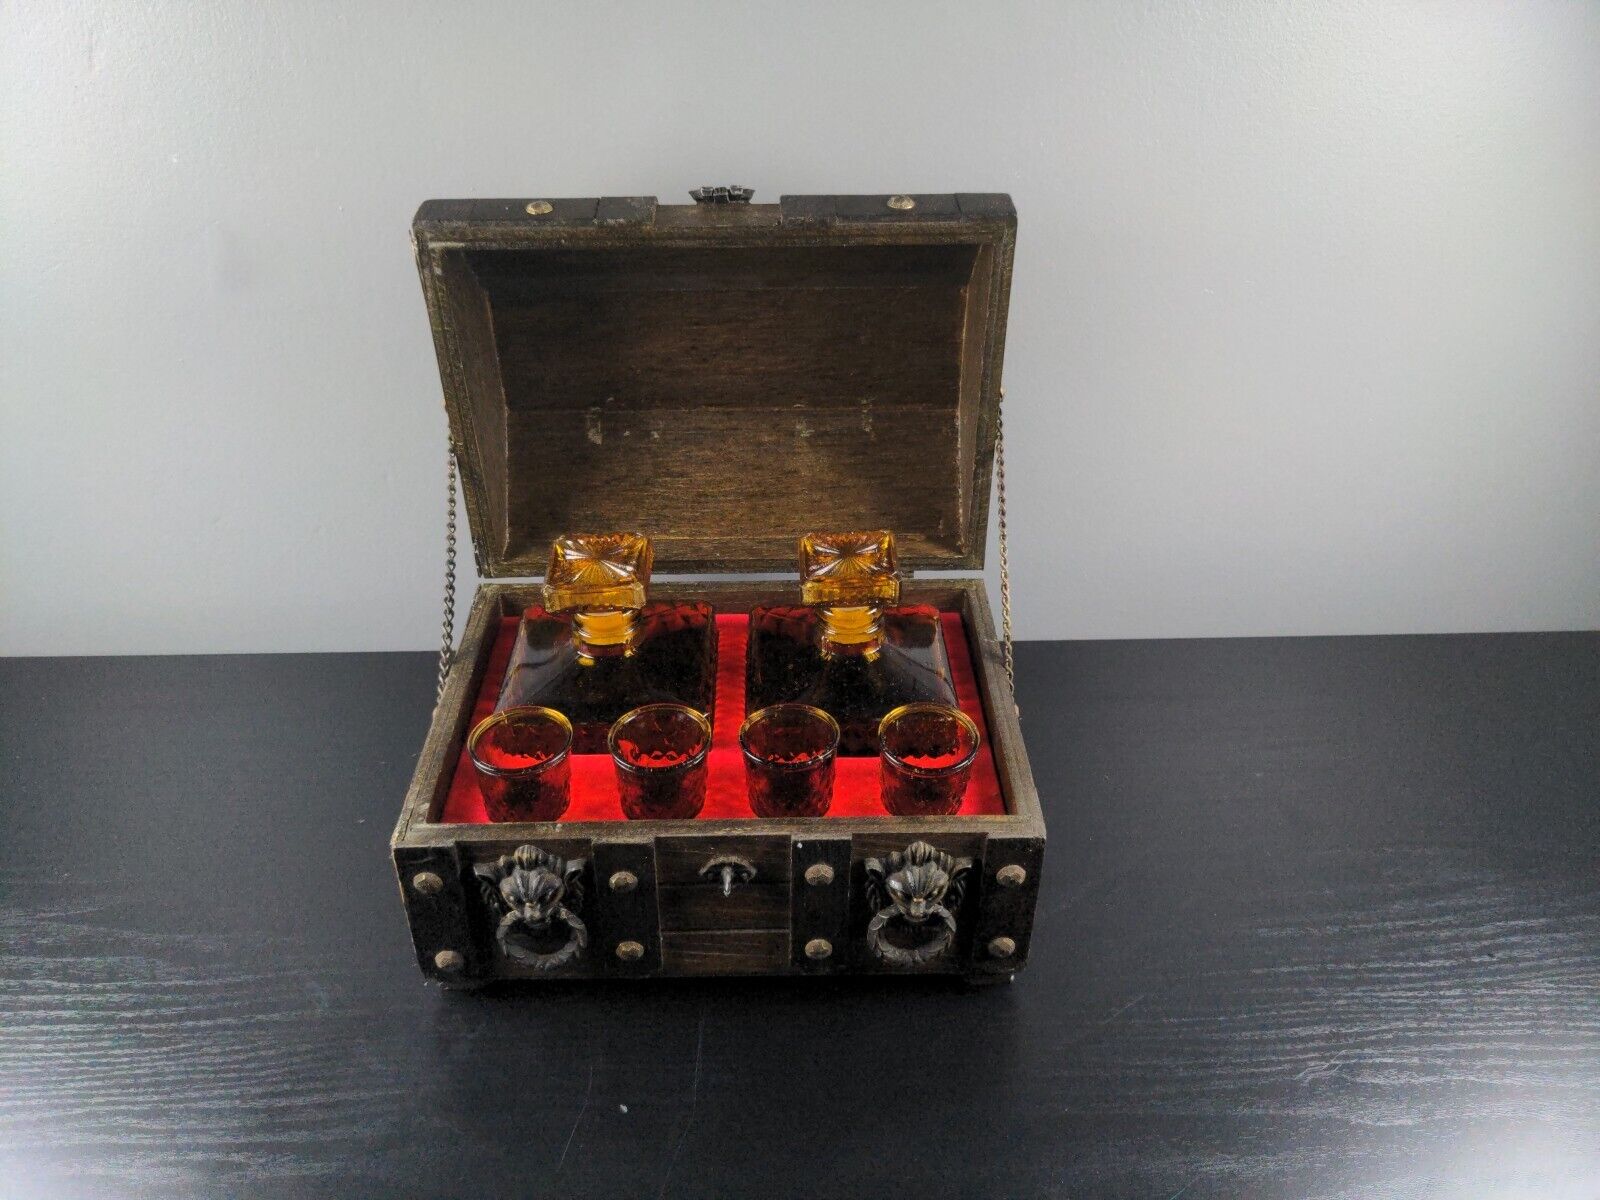 Vintage Treasure Chest Whiskey Bar Decanter With 6 Shot Glasses Set (Taiwan)